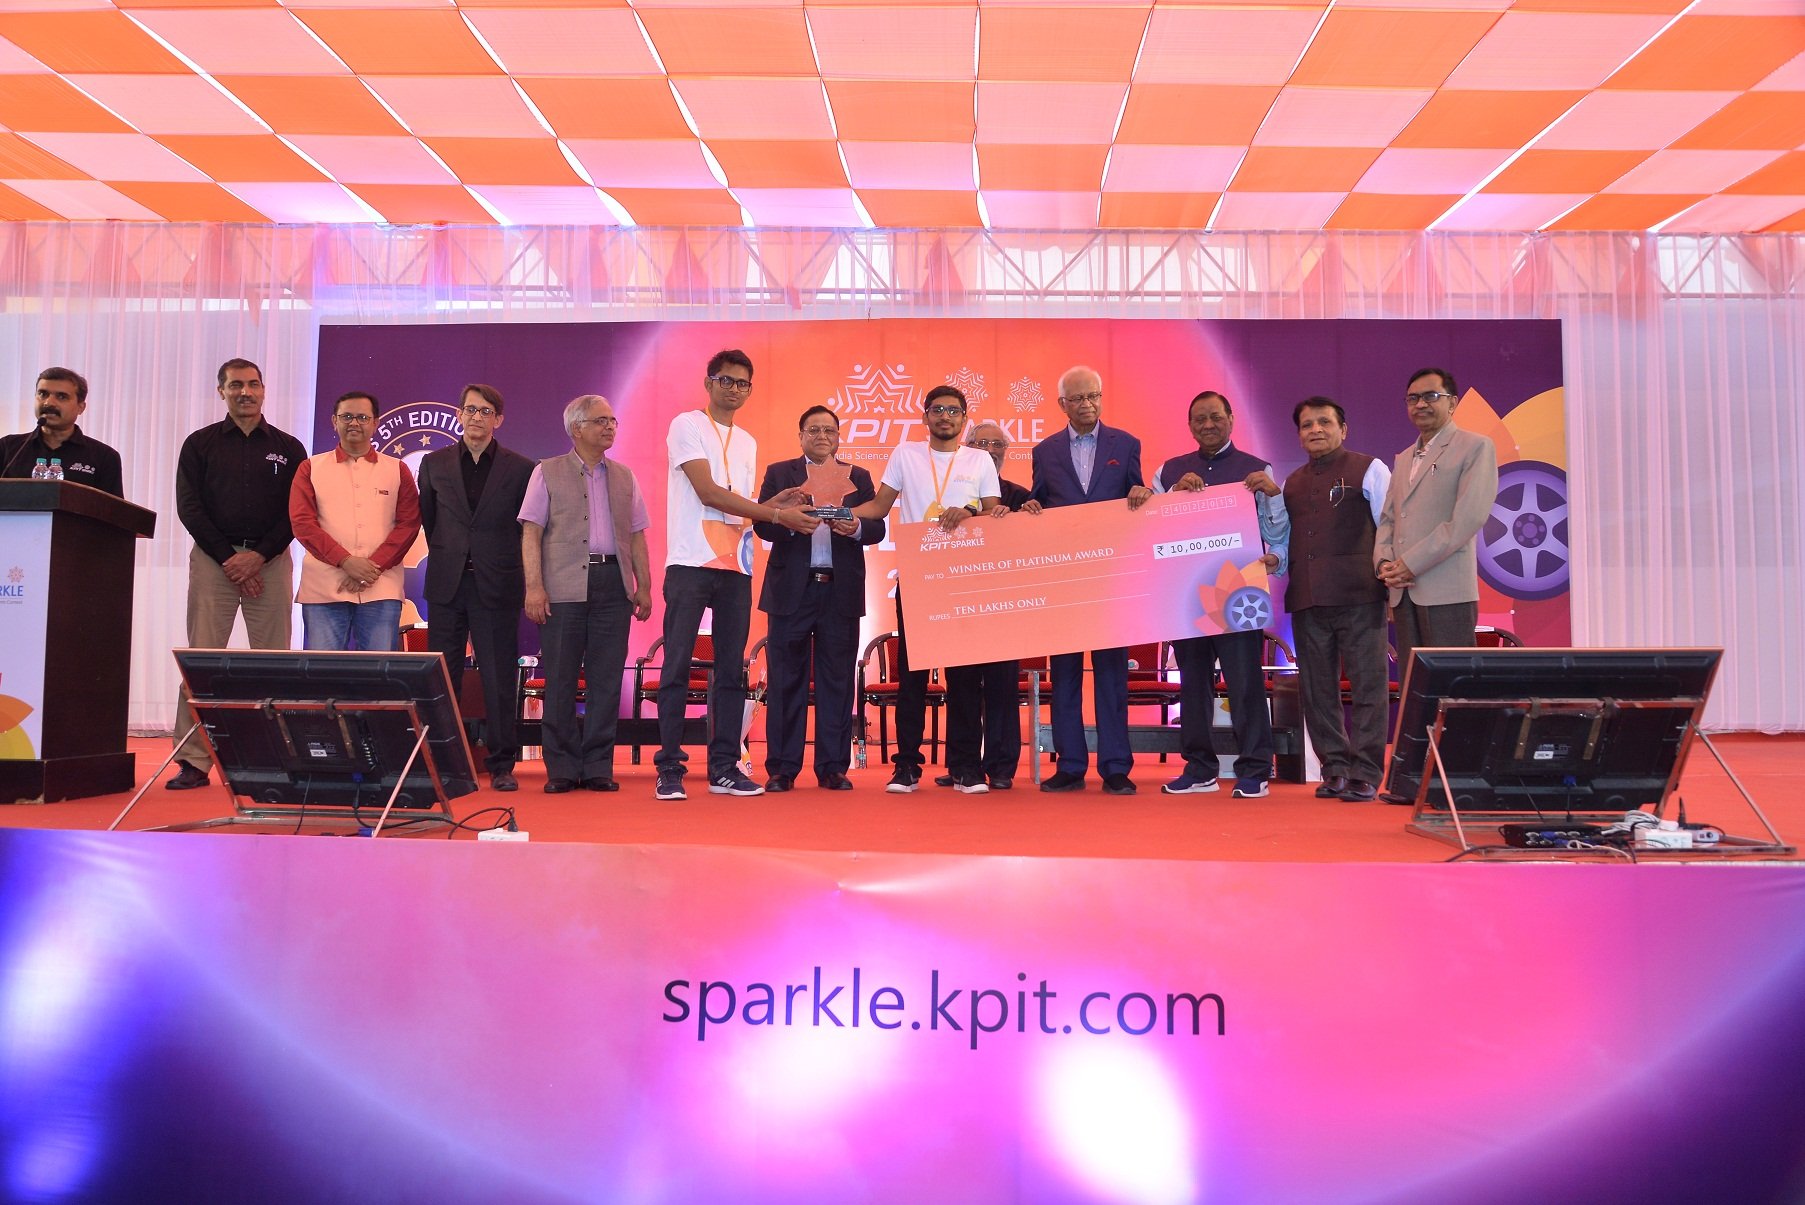 KPIT Announces Winners of the Fifth Edition of its National Innovation and Design Contest, KPIT Sparkle 2019